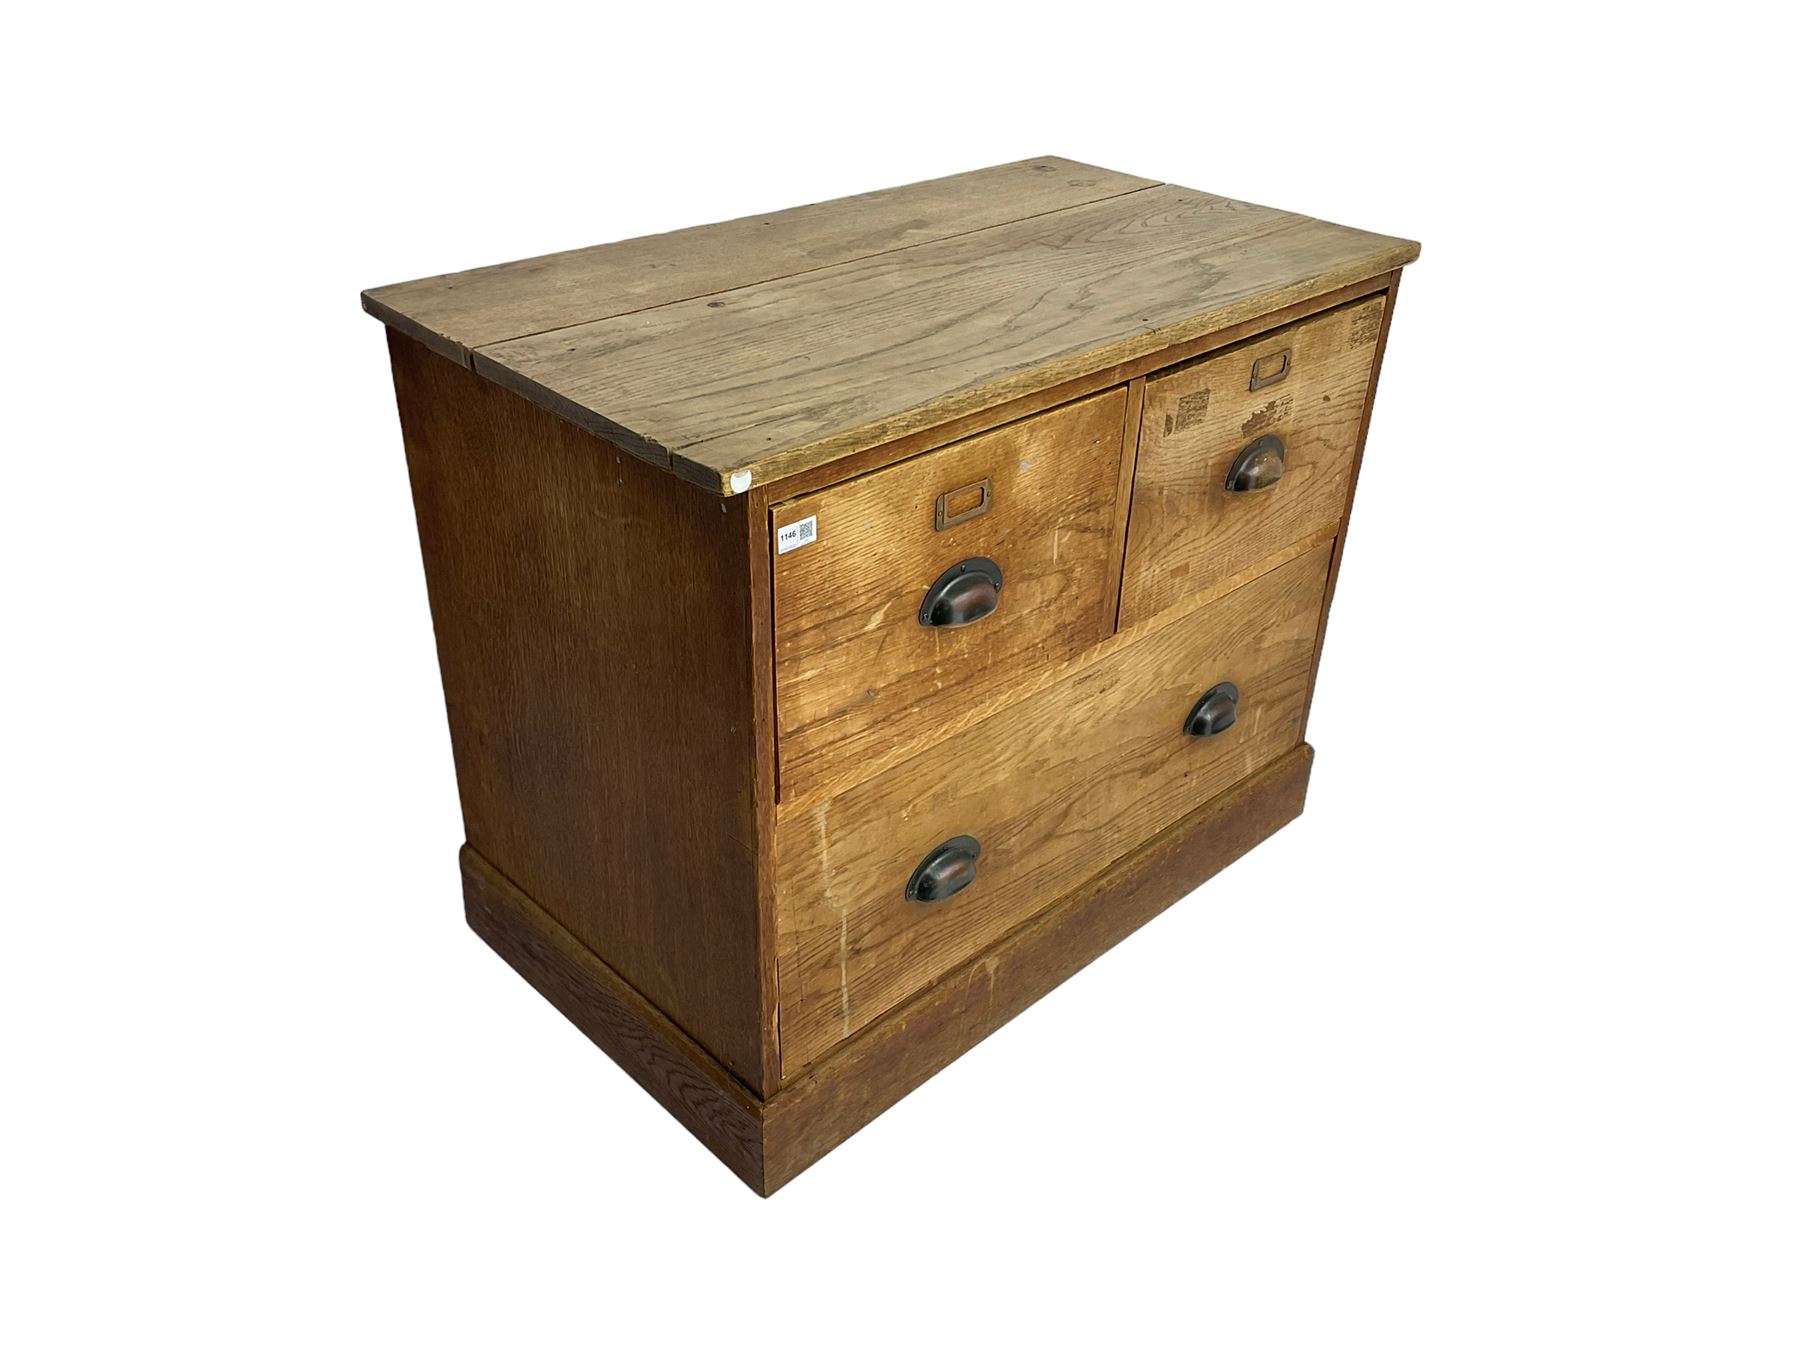 Early to mid-20th century oak chest - Image 4 of 6